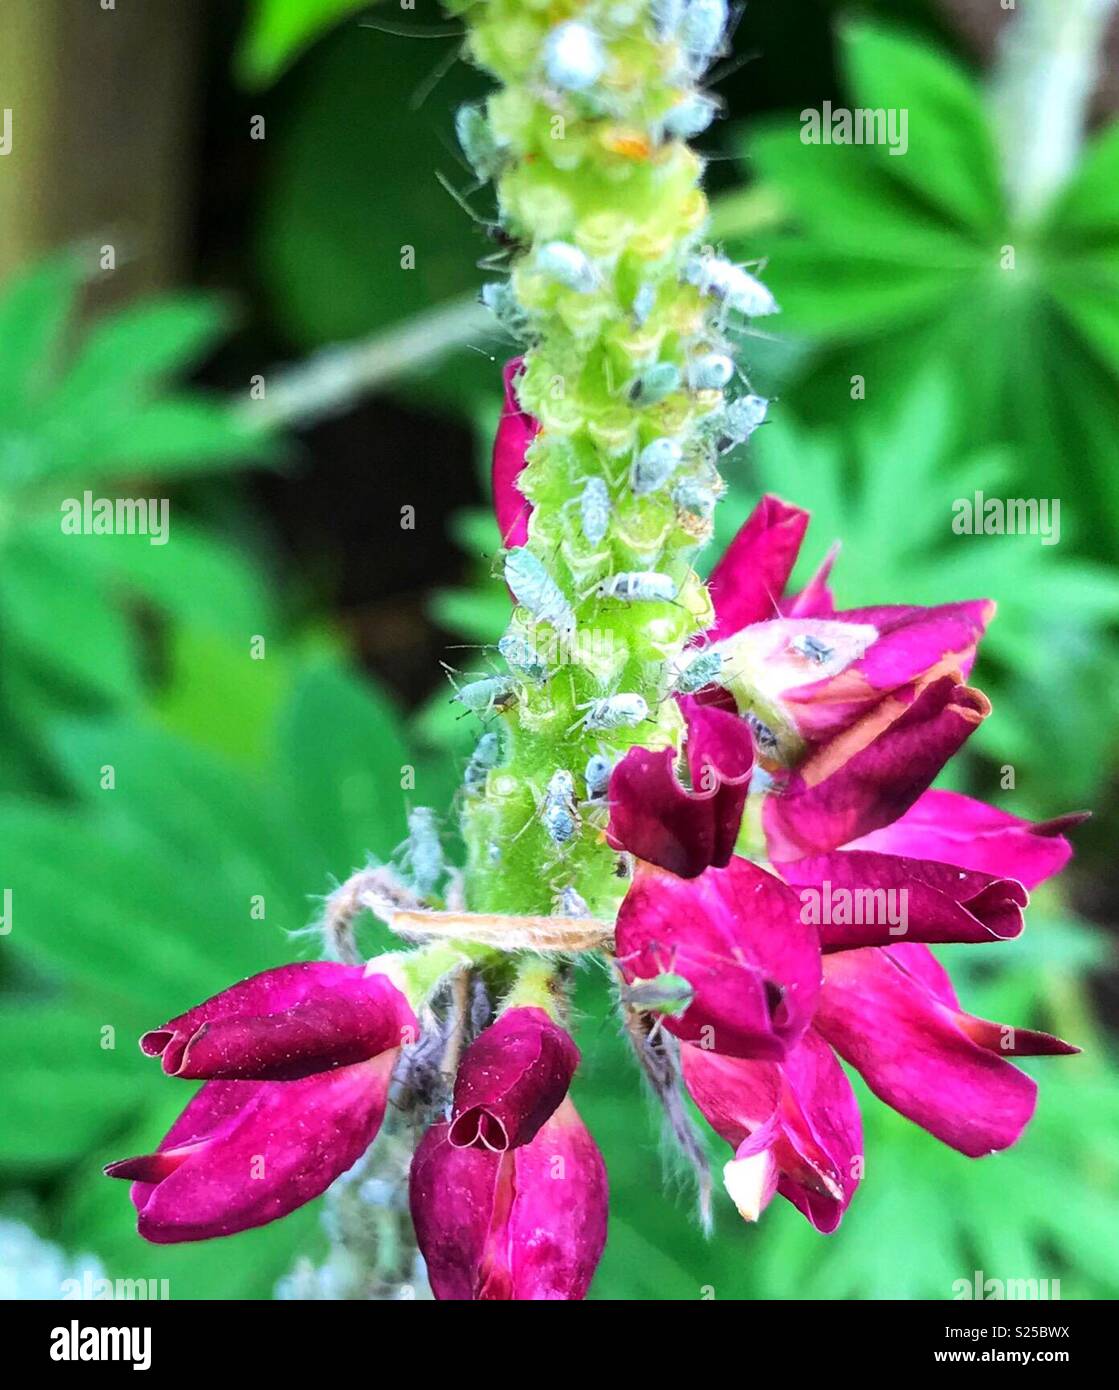 Aphids on lupin plant Stock Photo